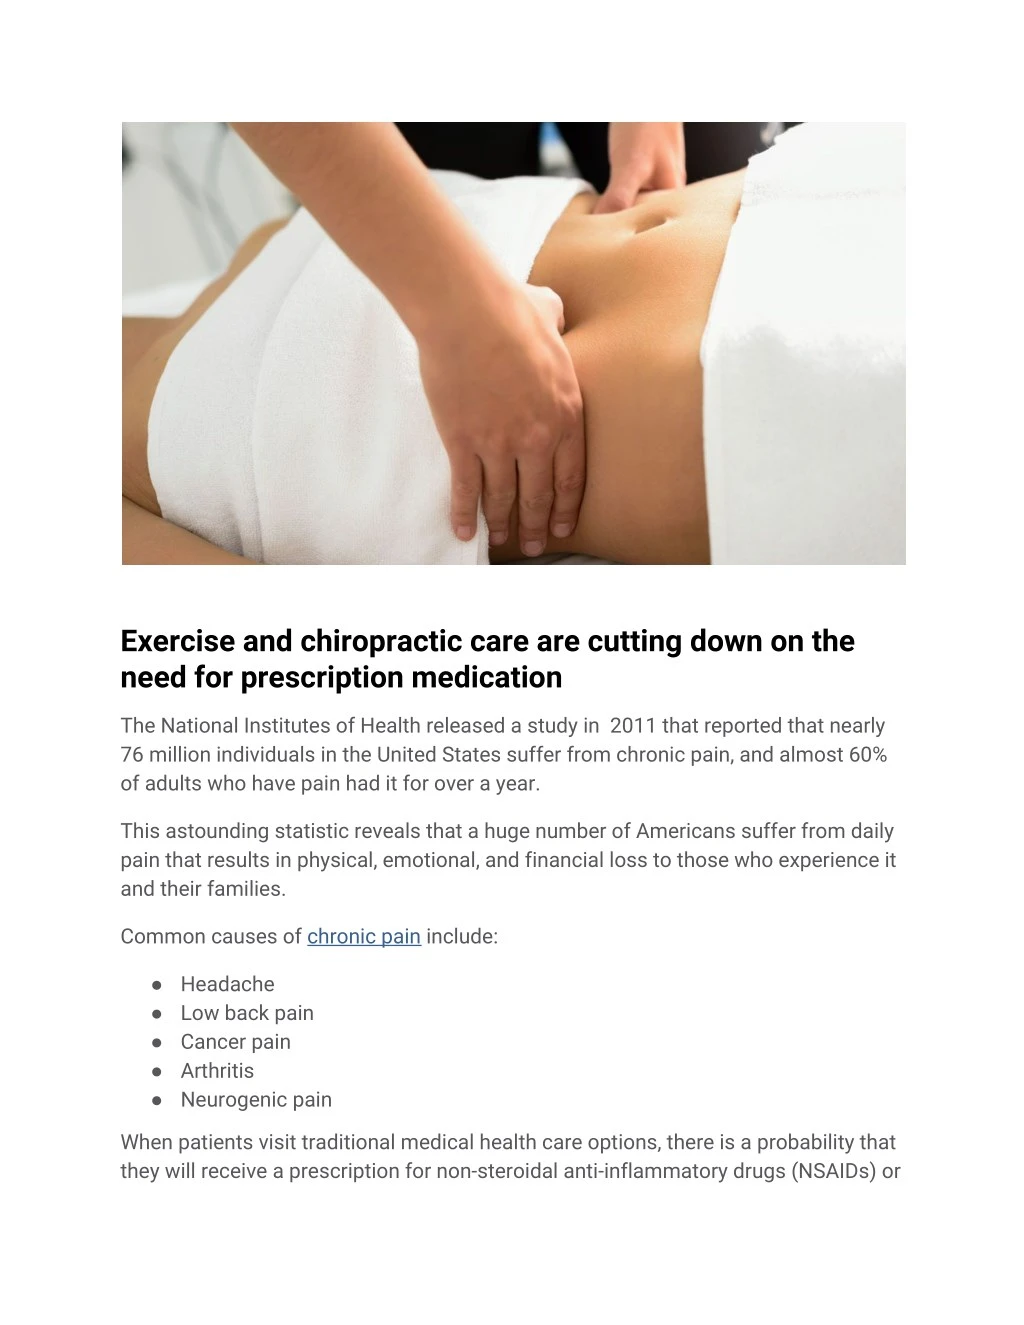 exercise and chiropractic care are cutting down